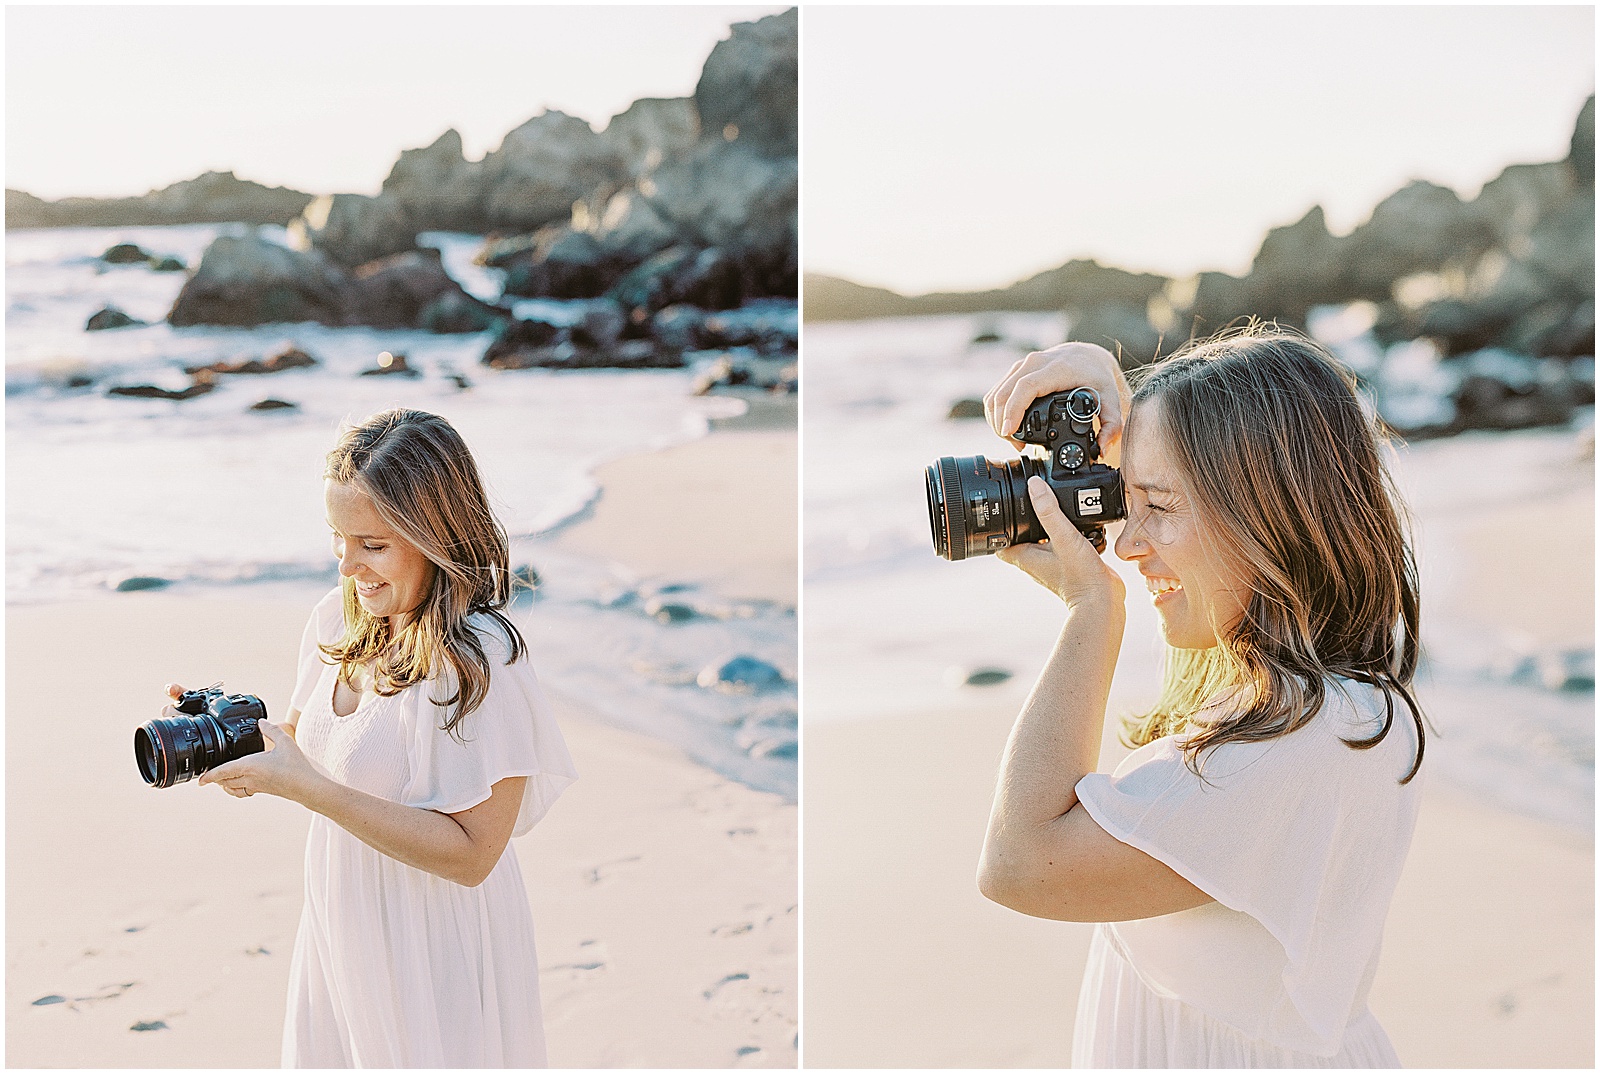 two images of a woman holding a camera on the beach